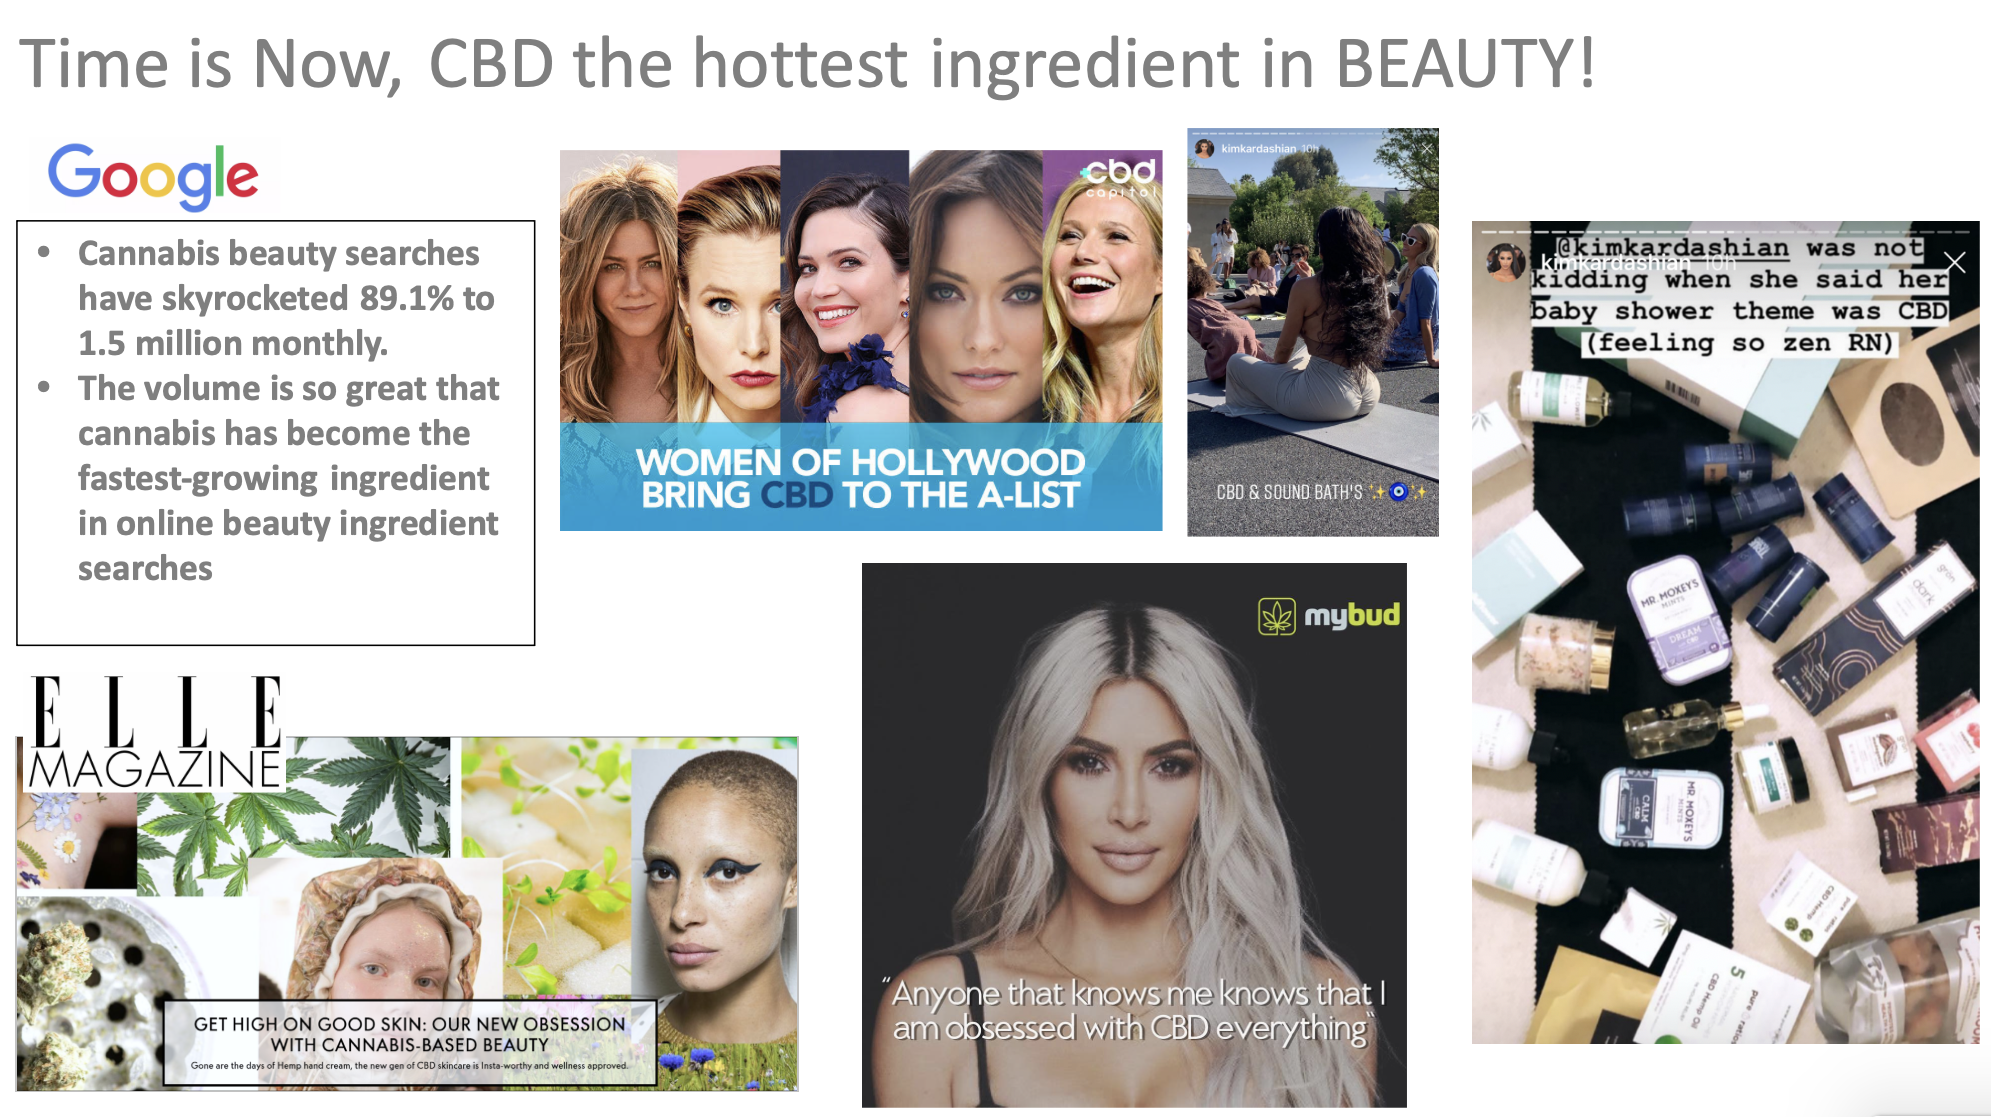 An image showing the before slide of the business pitch deck, discussing why CBD is relative in beauty products